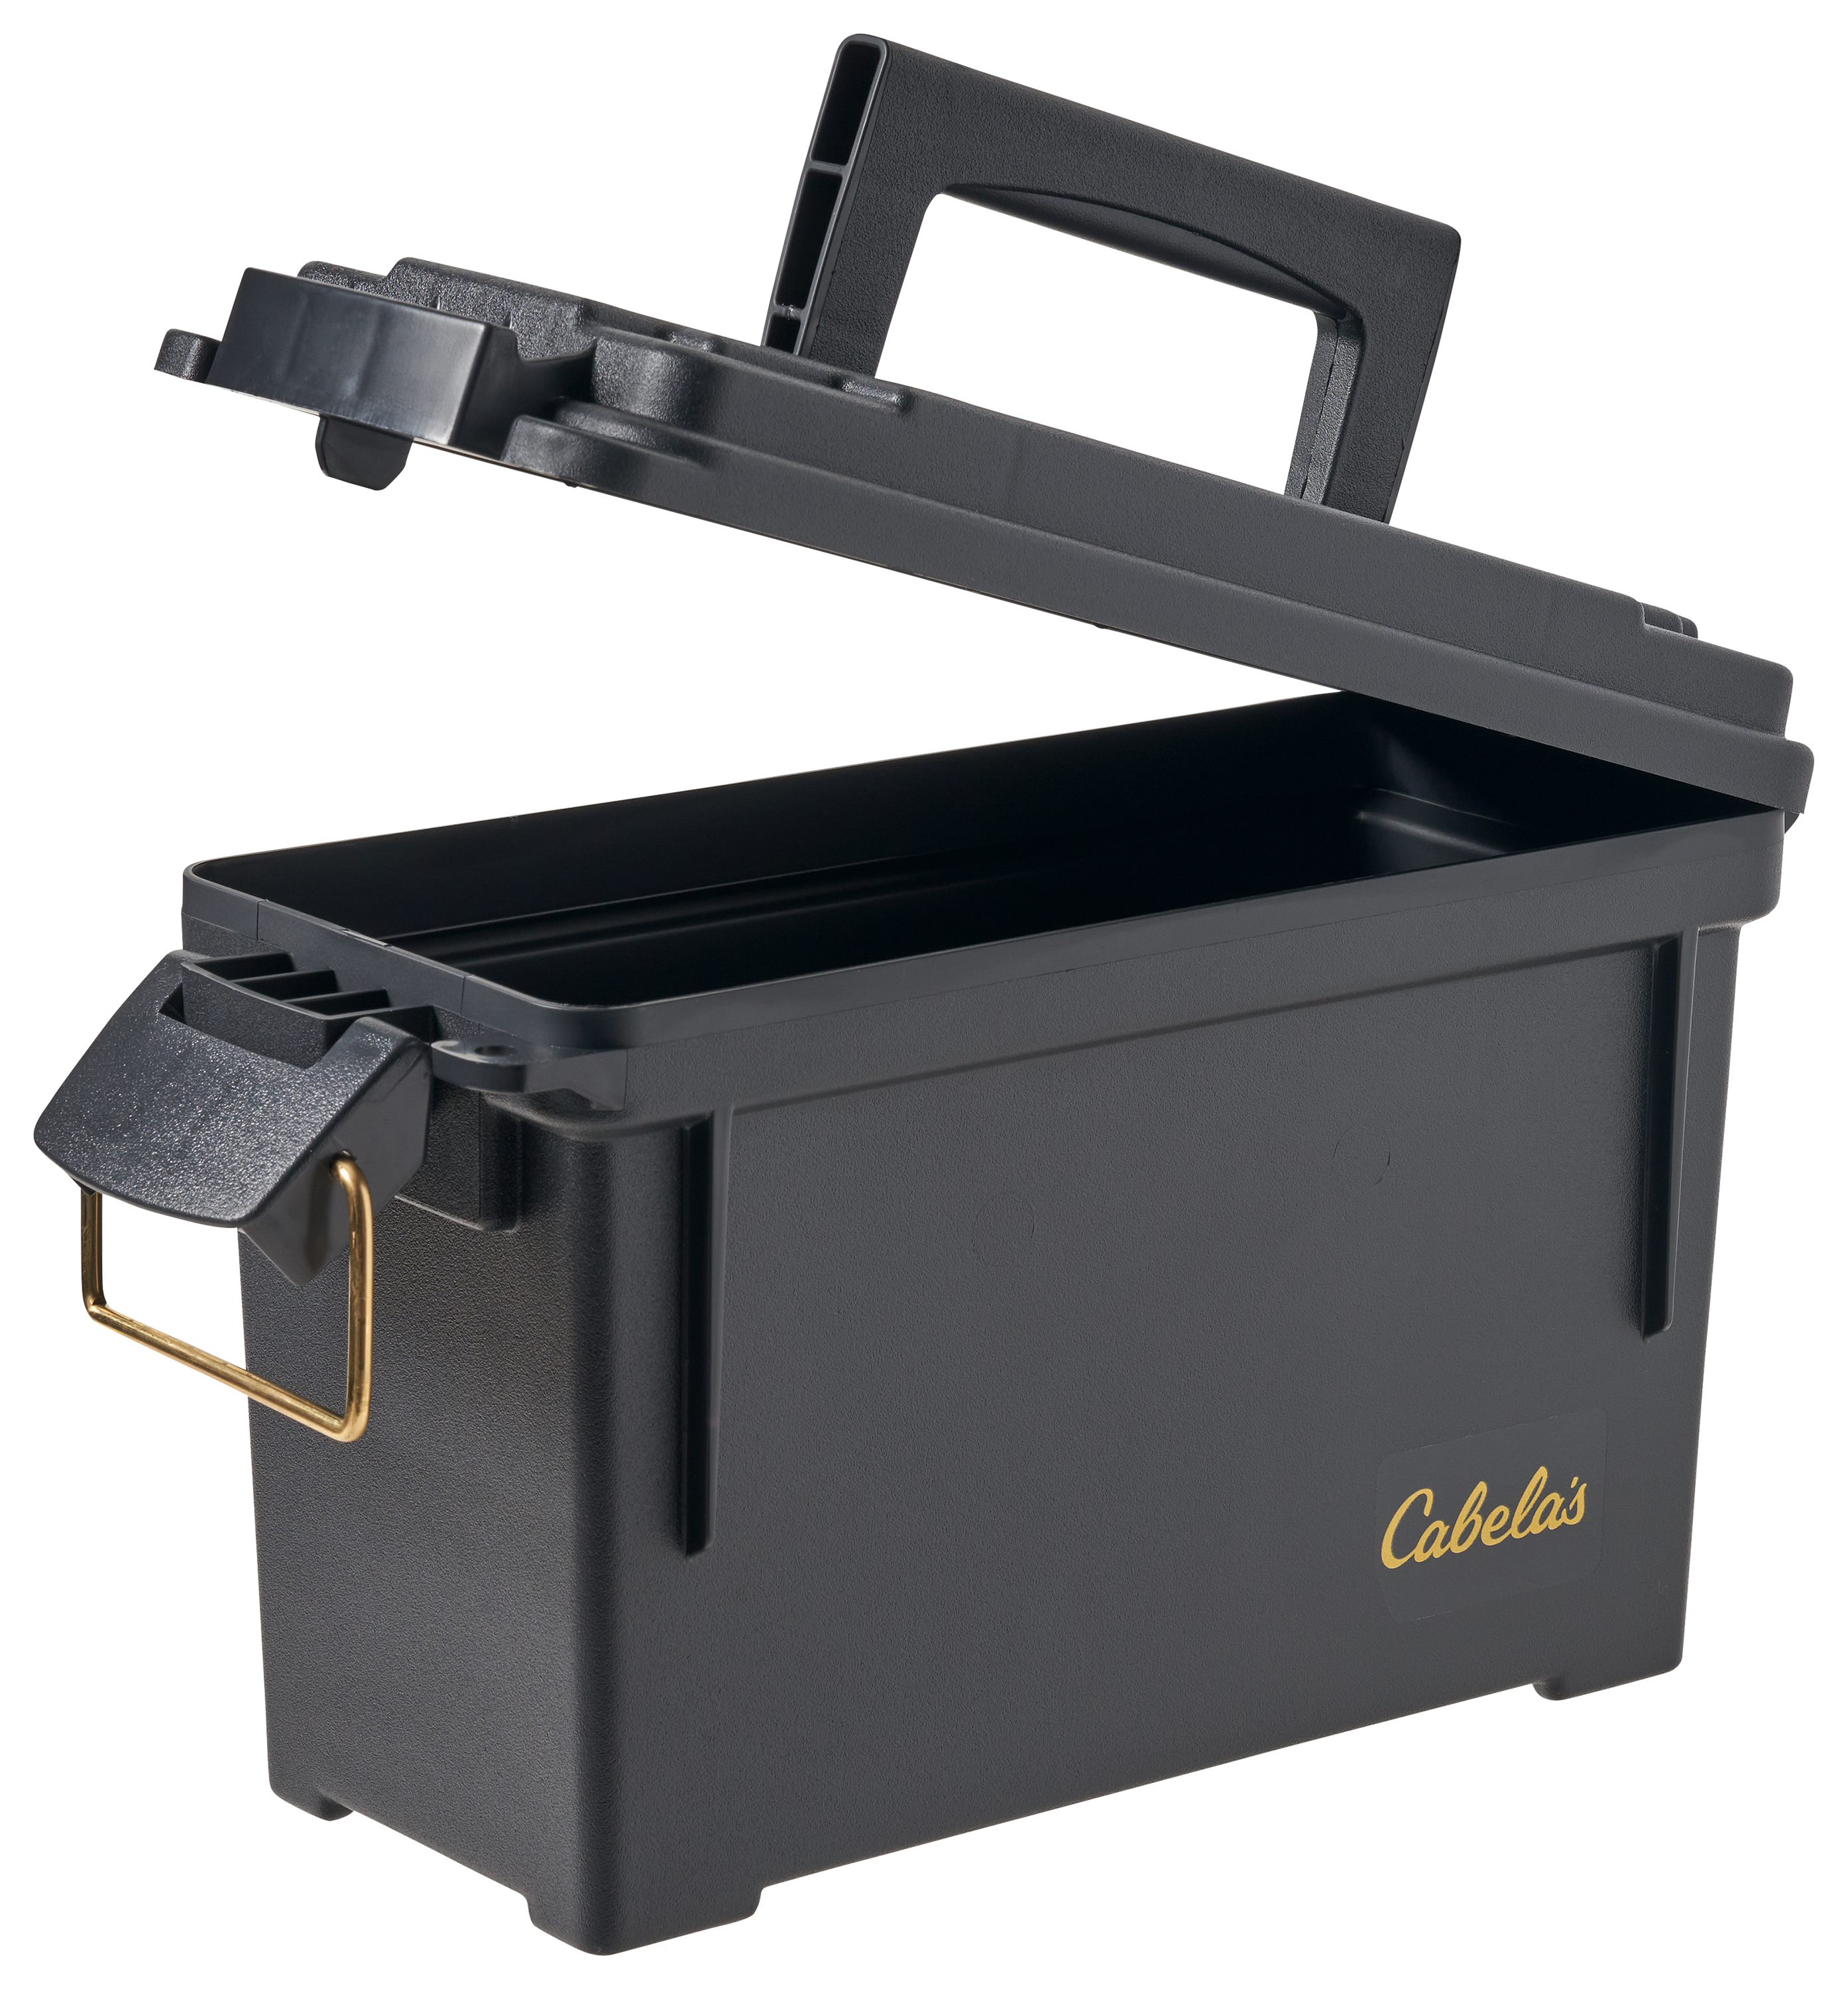 MTM 9mm Ammo Can 1000 Round  $1.22 Off 4.9 Star Rating w/ Free